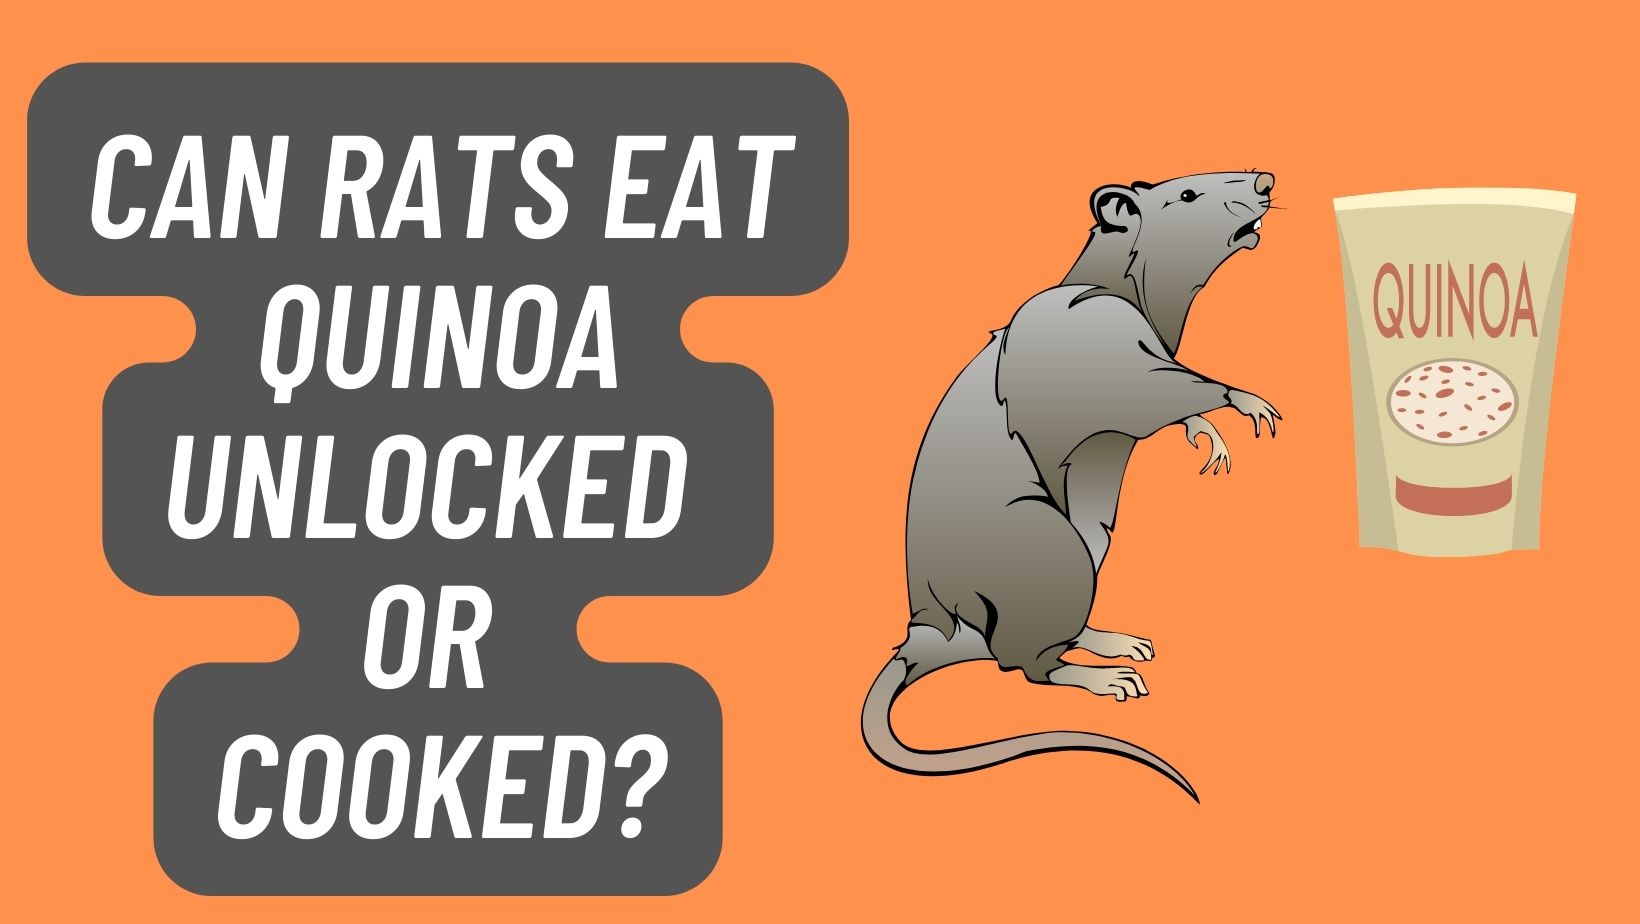 Can Rats Eat Quinoa [Unlocked or Cooked]?